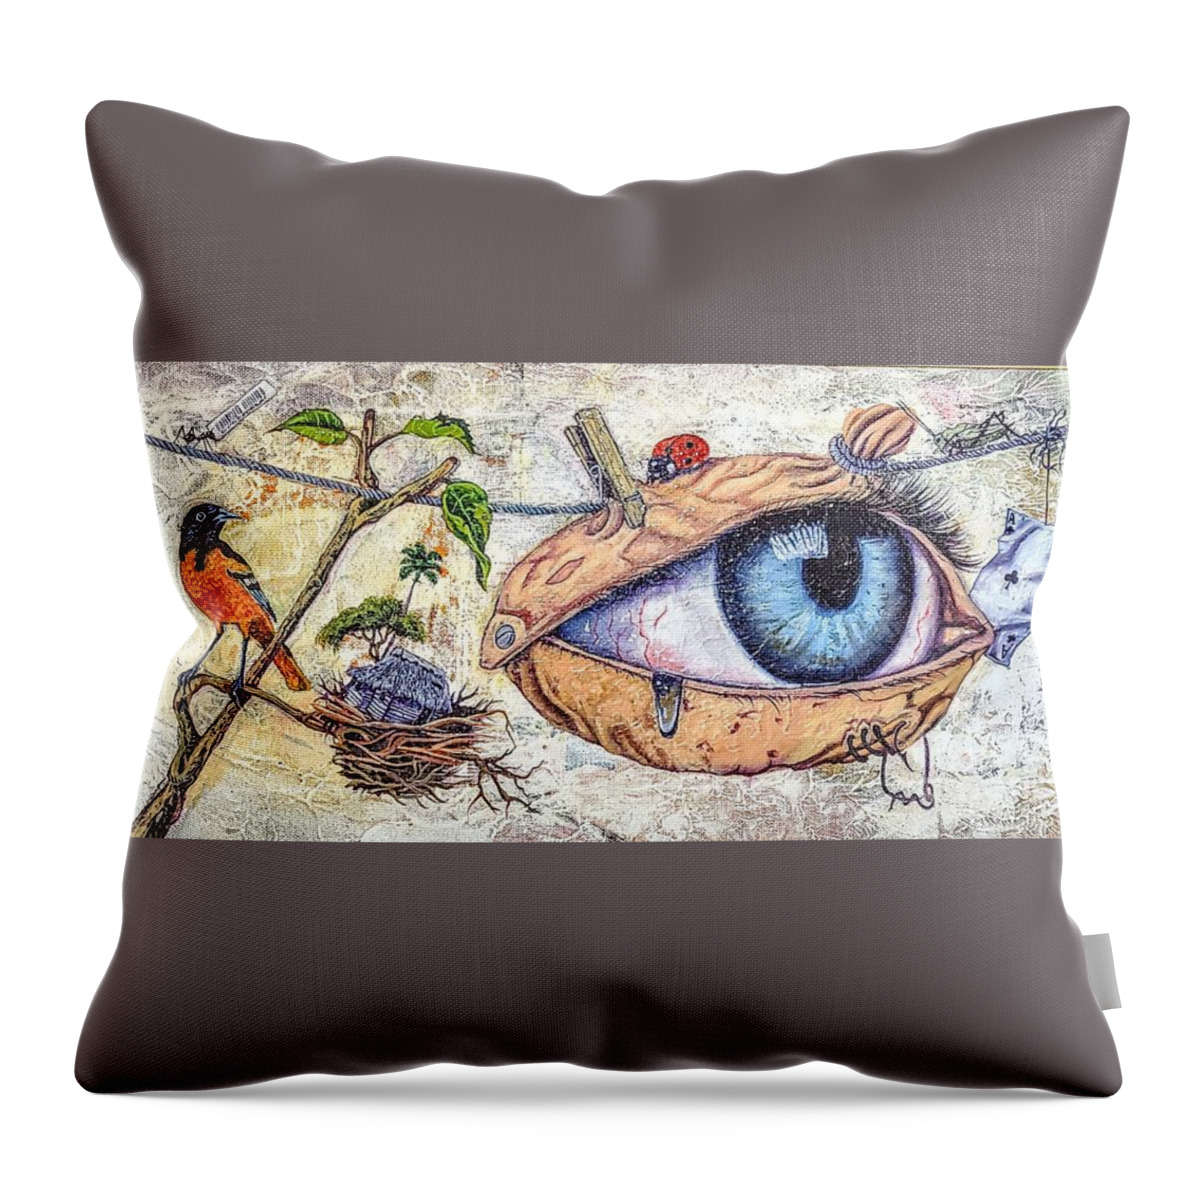 Ojos Throw Pillow featuring the painting Ojo by Carlos Rodriguez